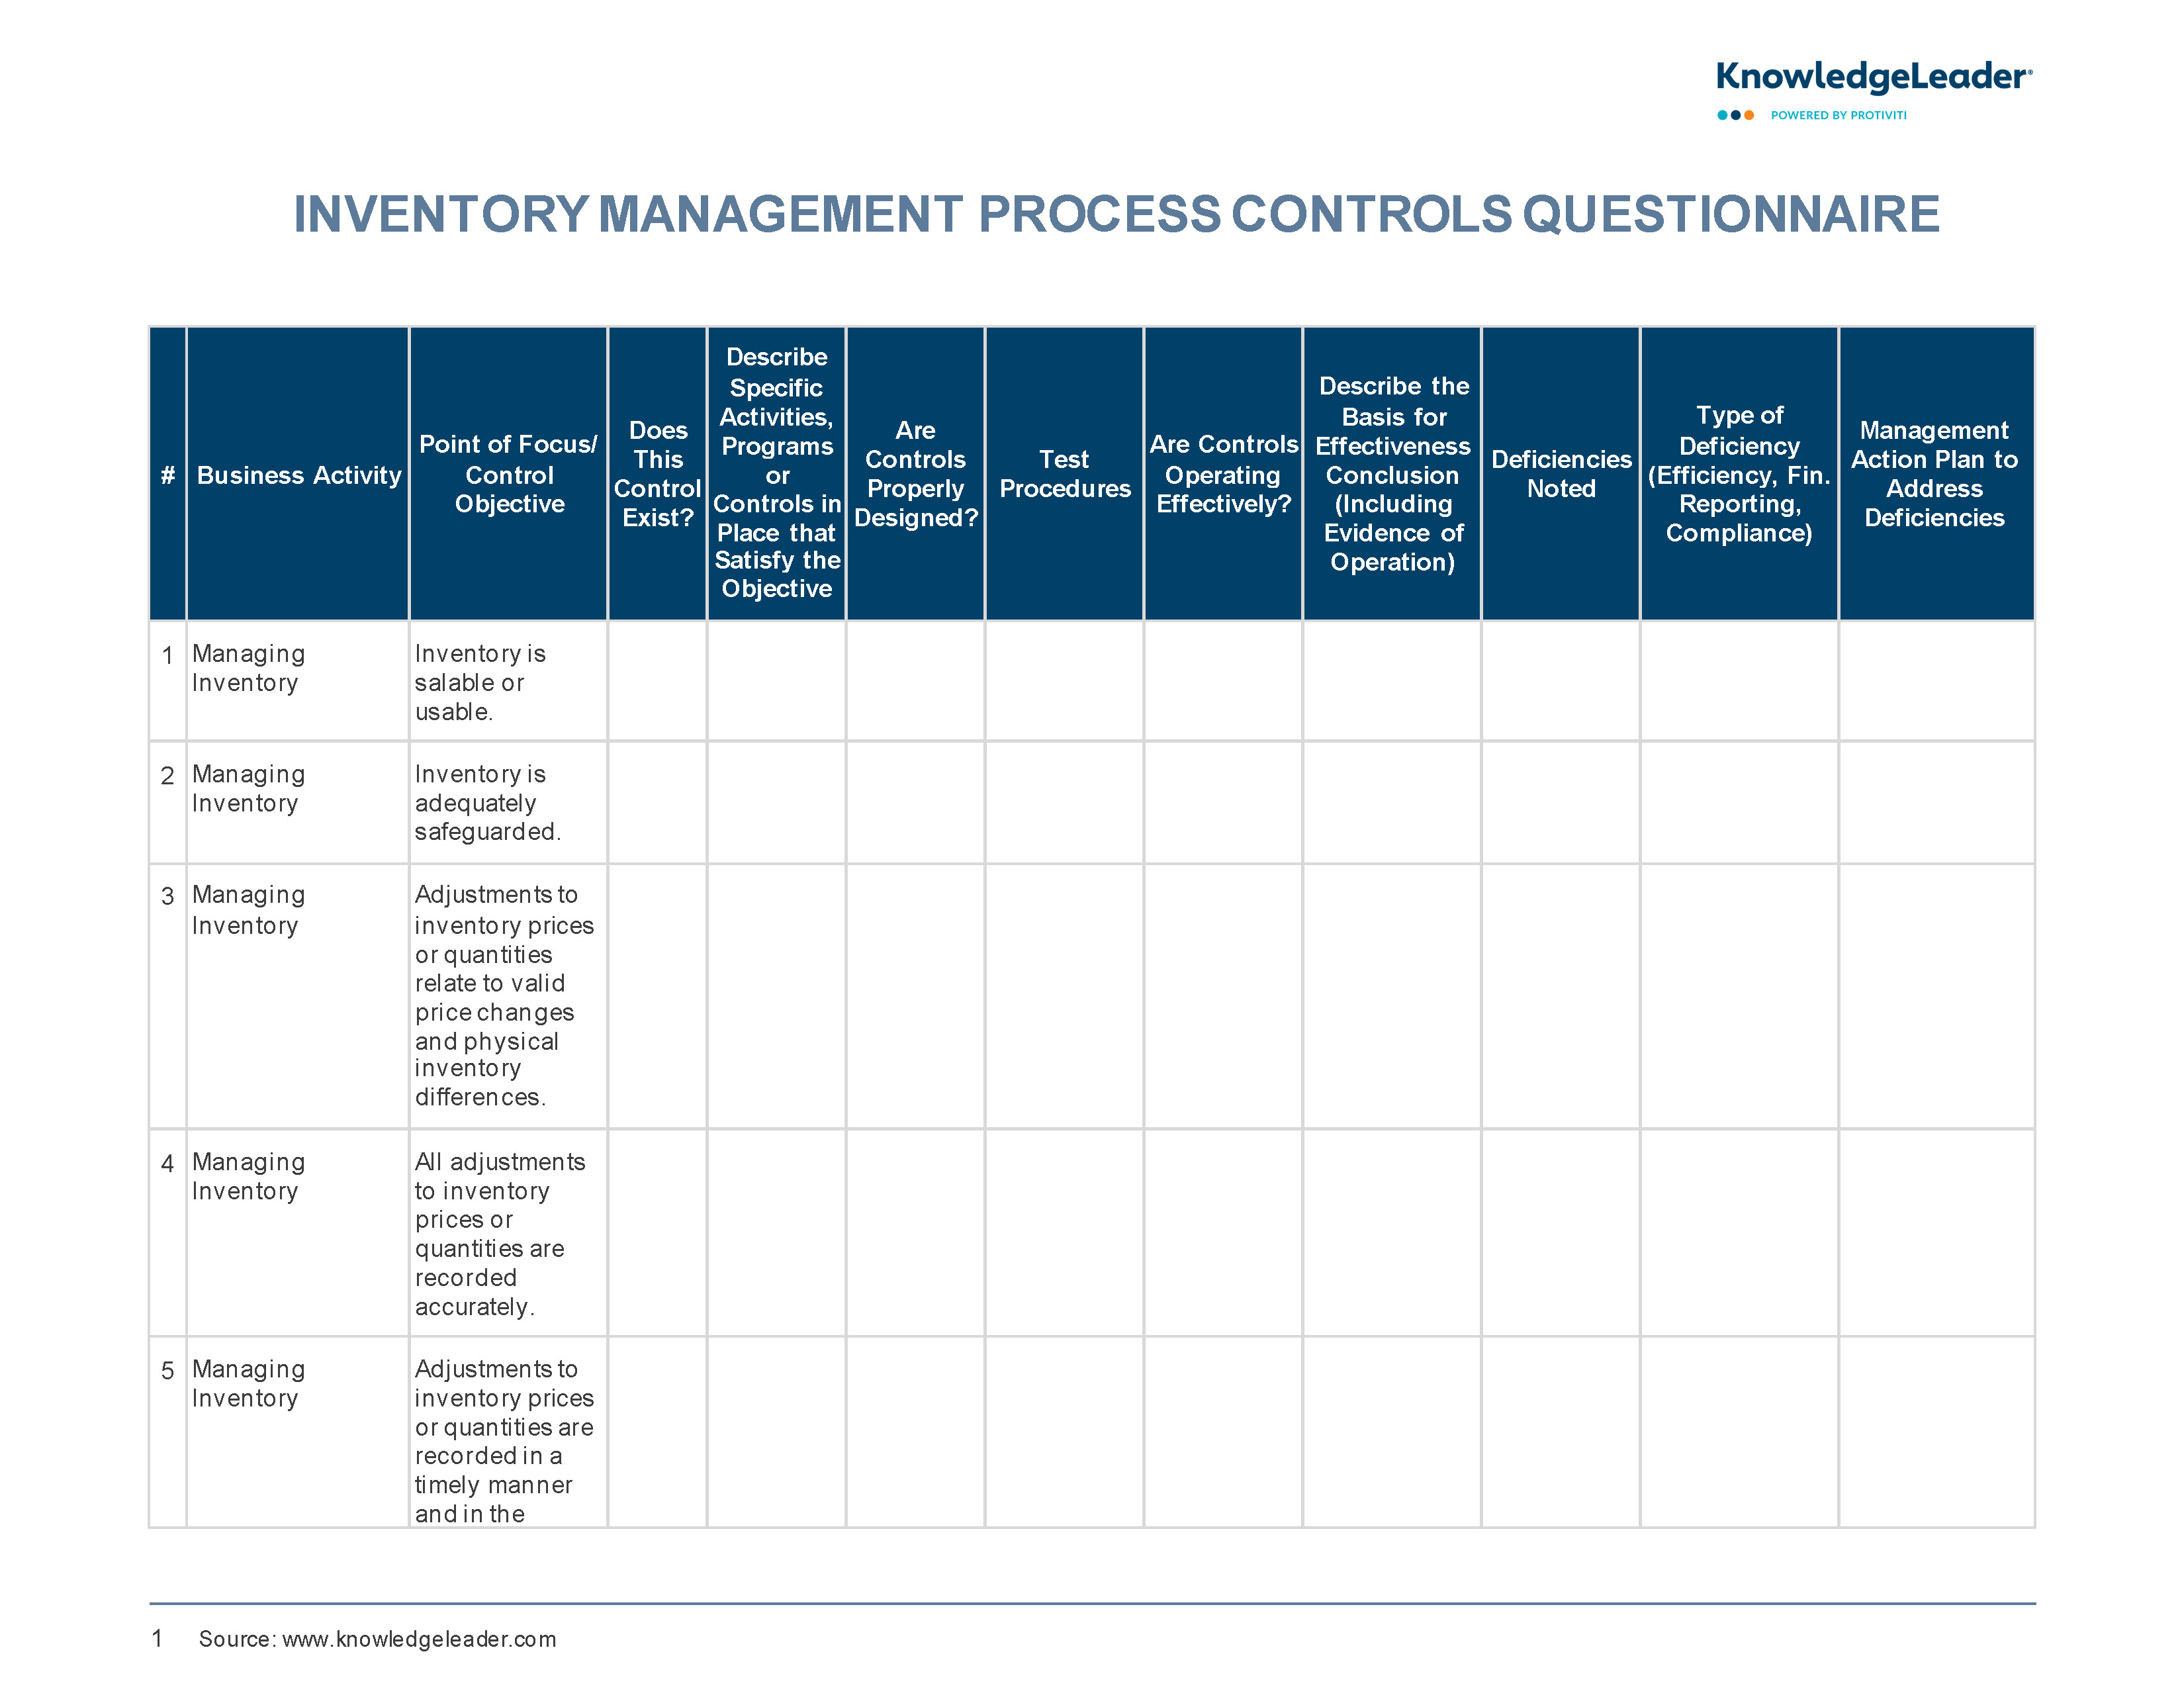 Screenshot of the first page of Inventory Management Controls Questionnaire